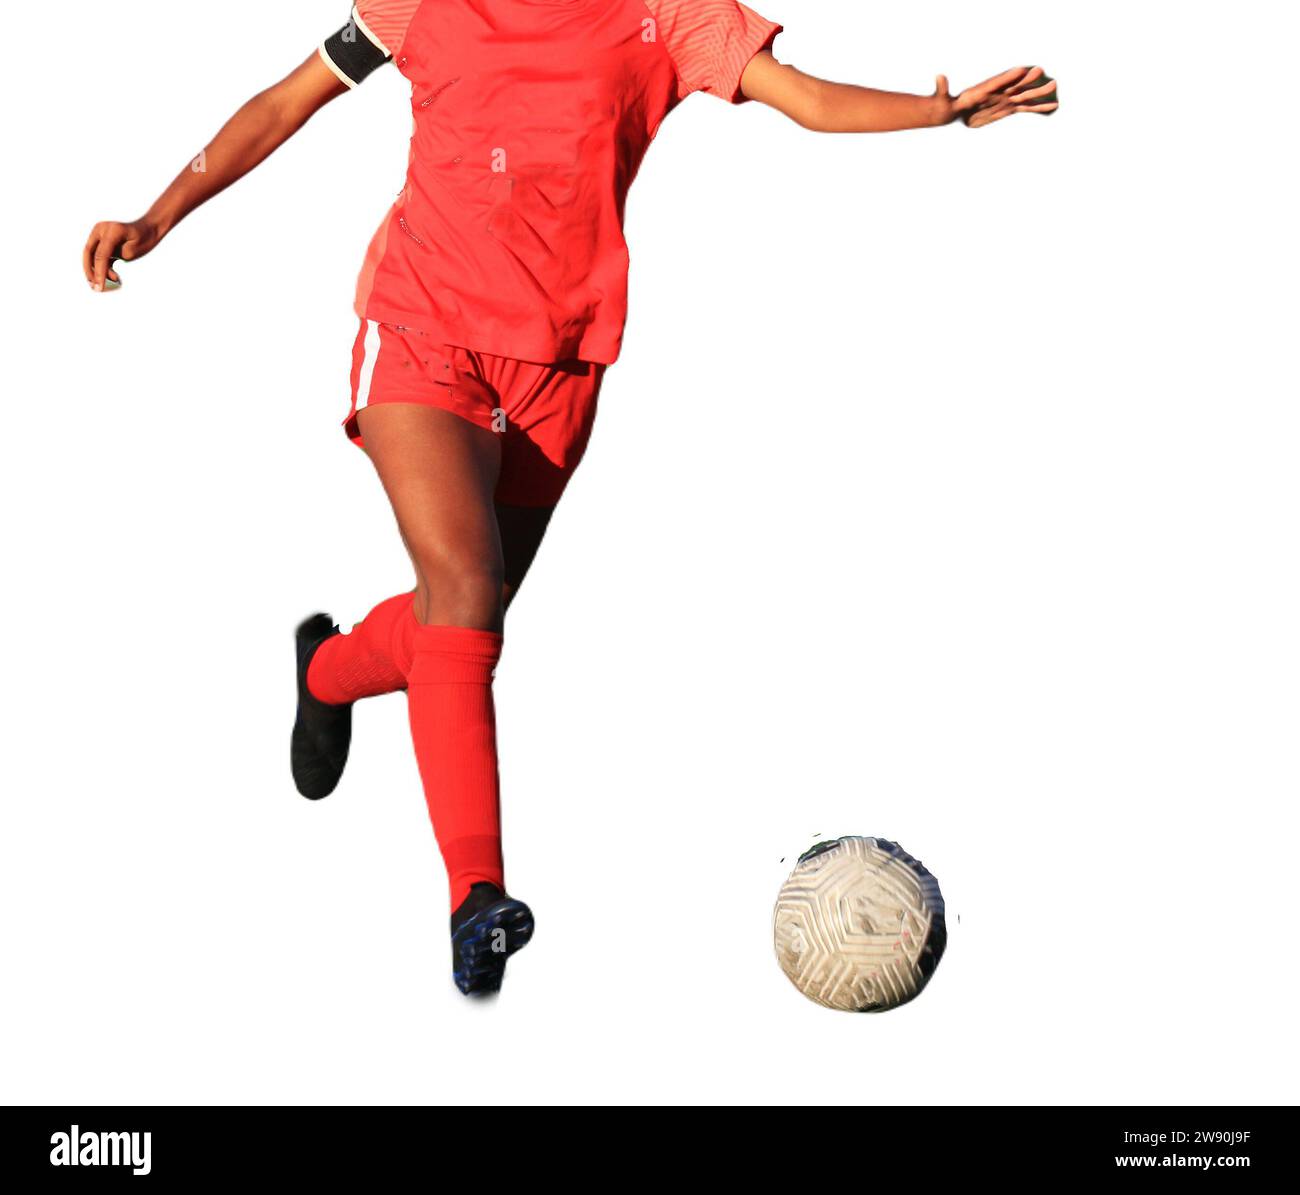 A female soccer player wearing a red uniform is running with the ball with a white background. Stock Photo